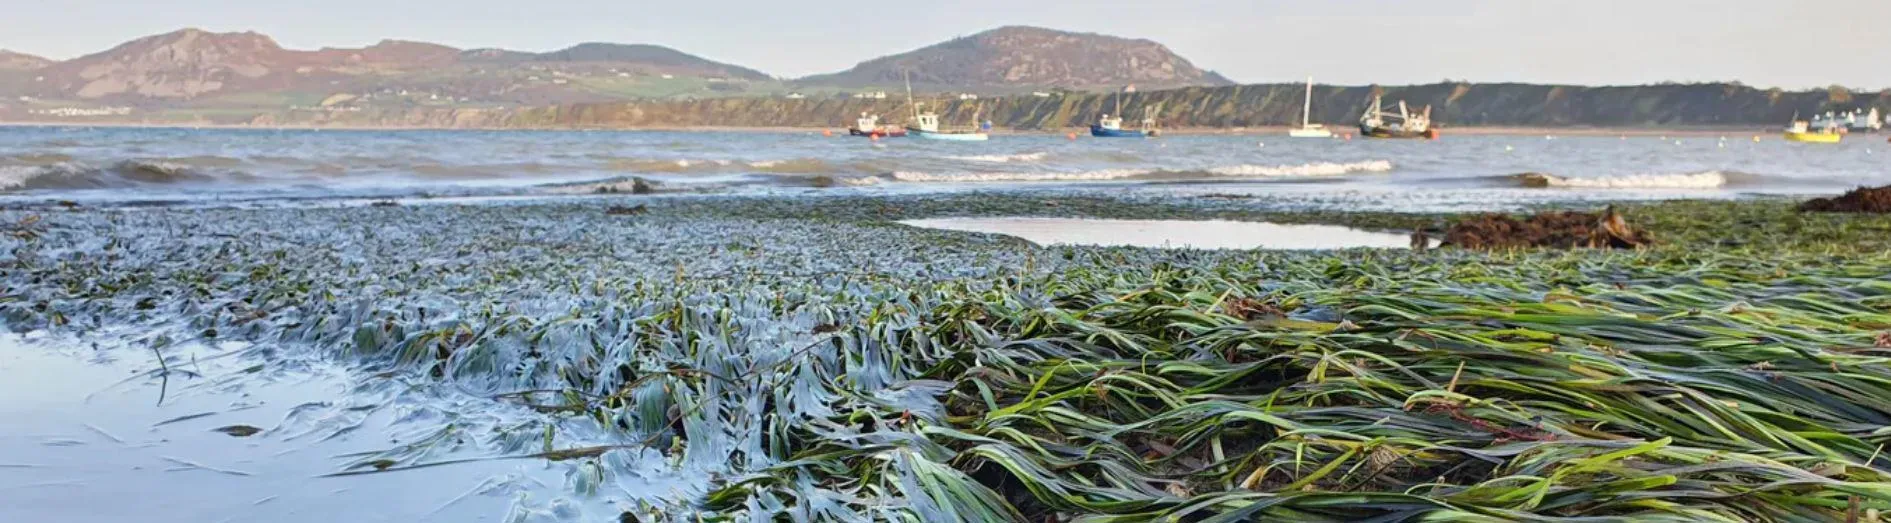 A healthy seagrass meadow outside of Porthdinllaen harbour, North Wales.